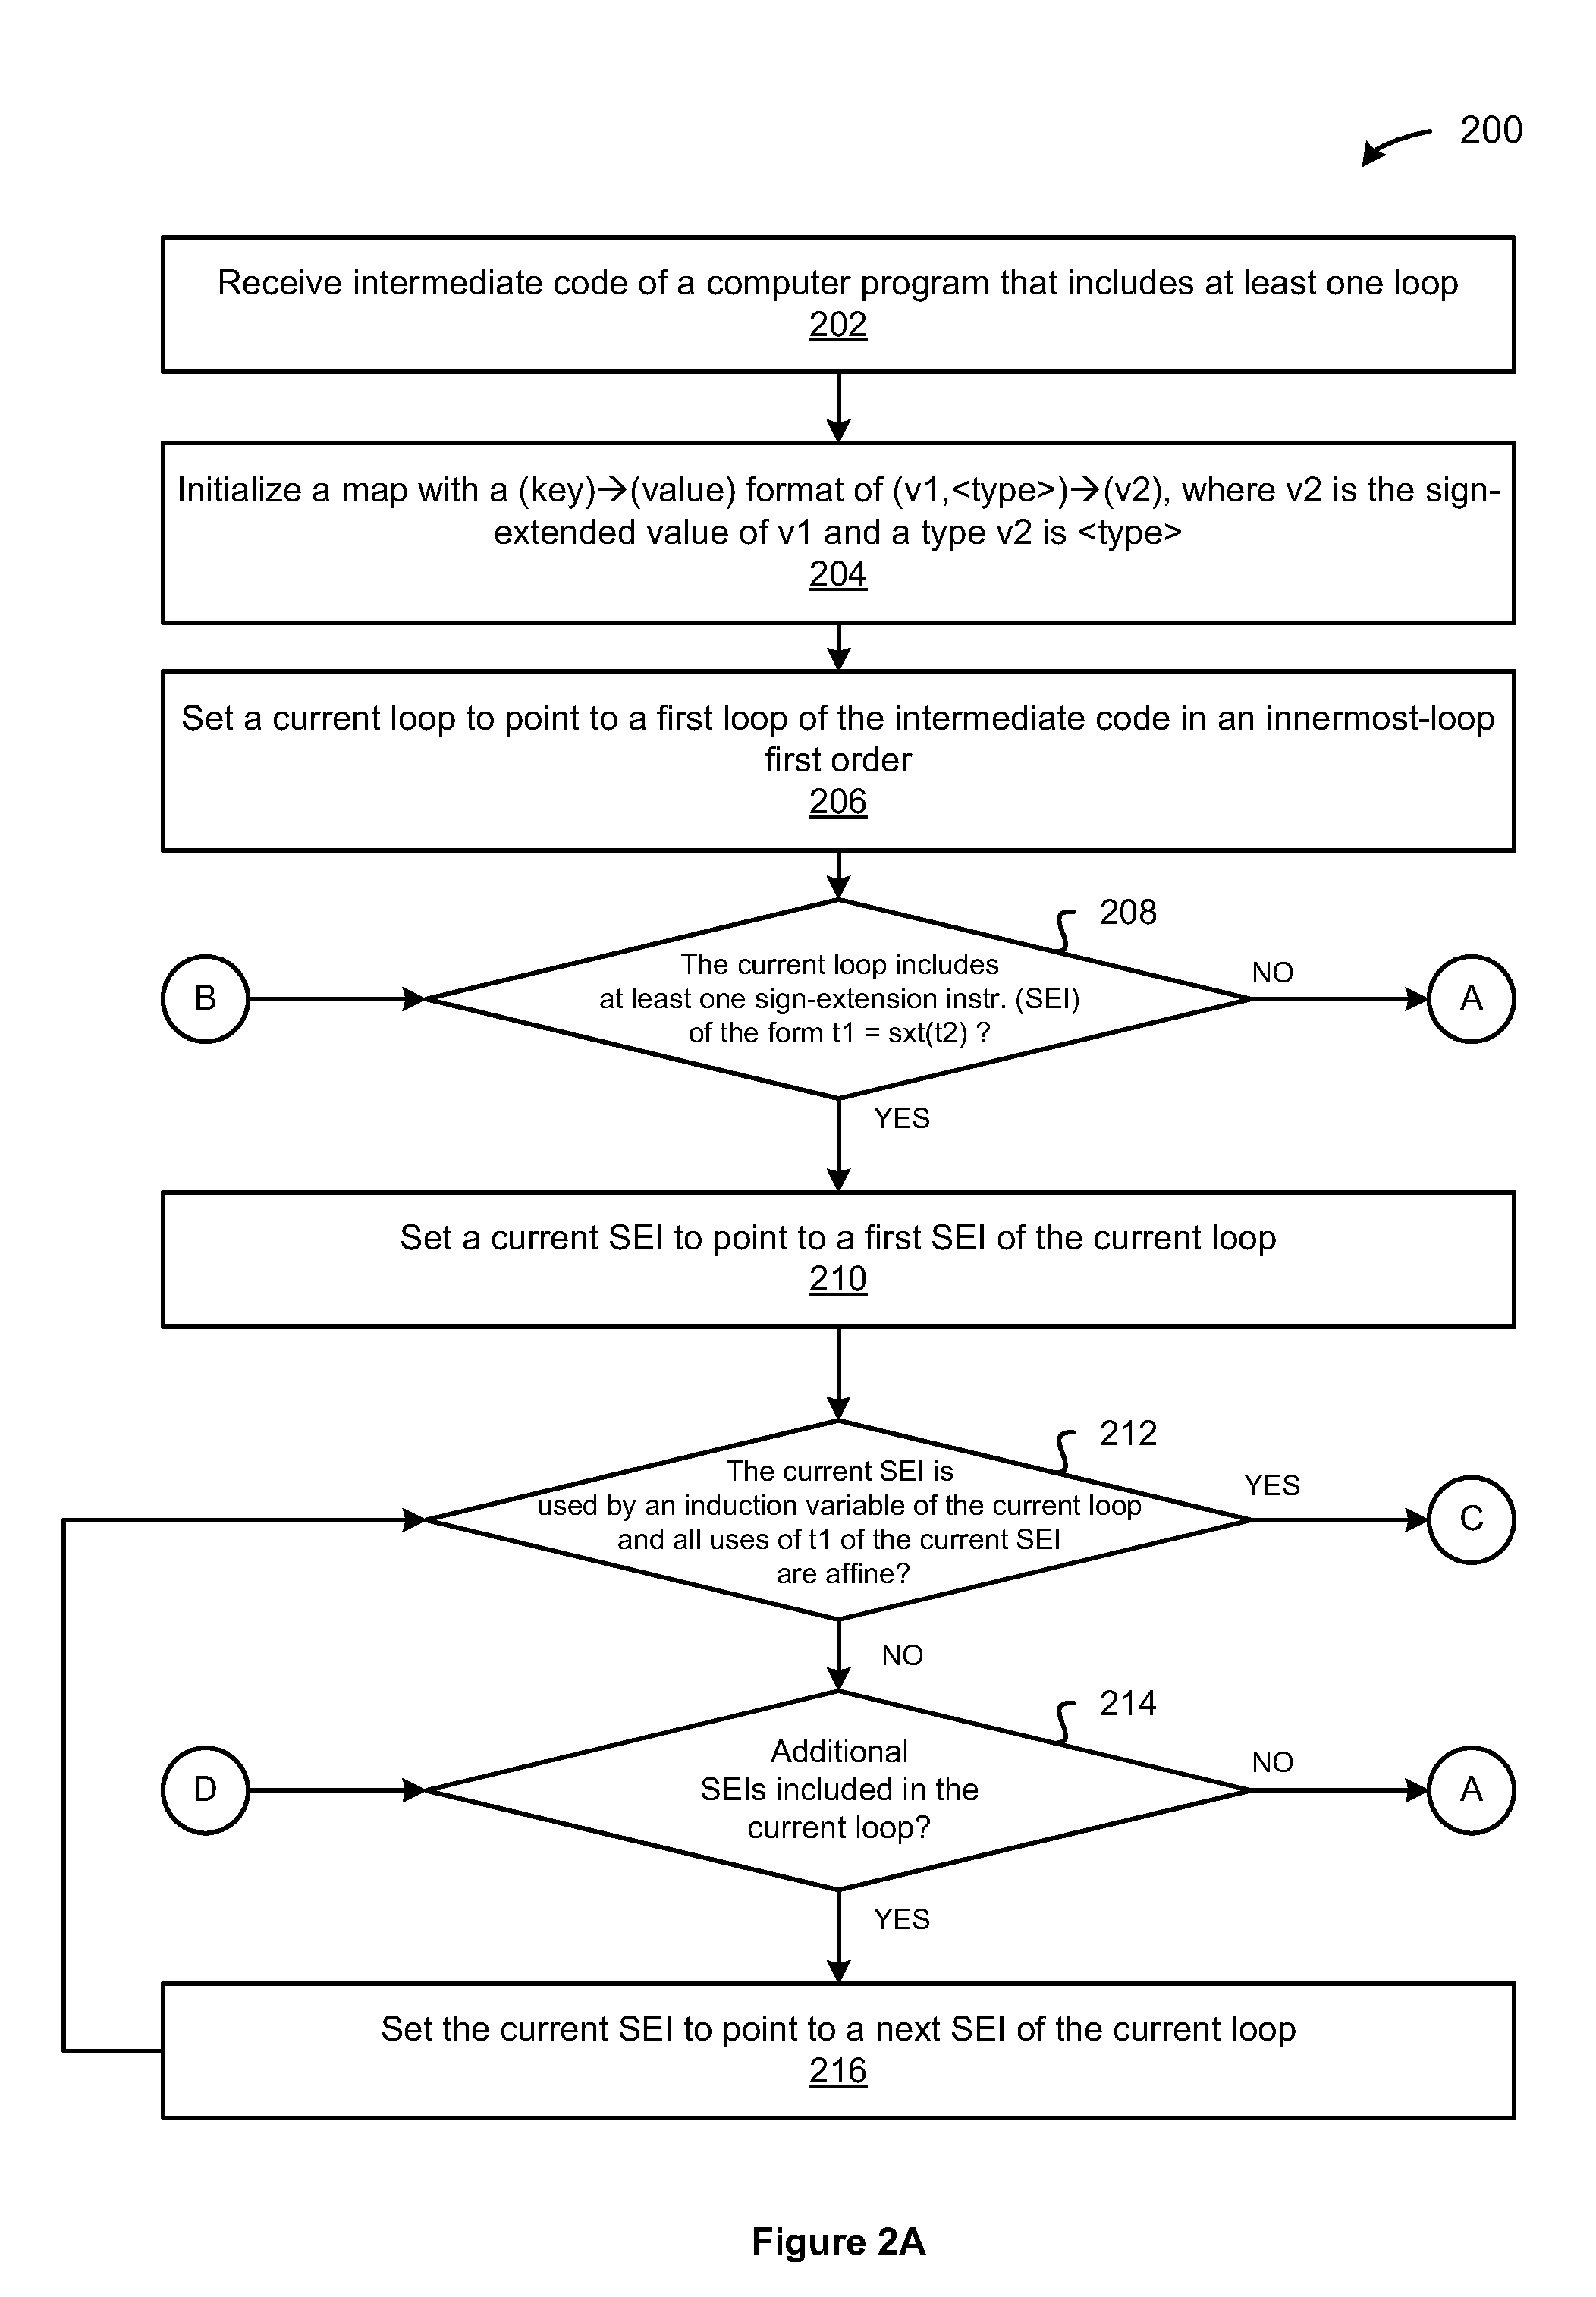 Demand-driven algorithm to reduce sign-extension instructions included in loops of a 64-bit computer program